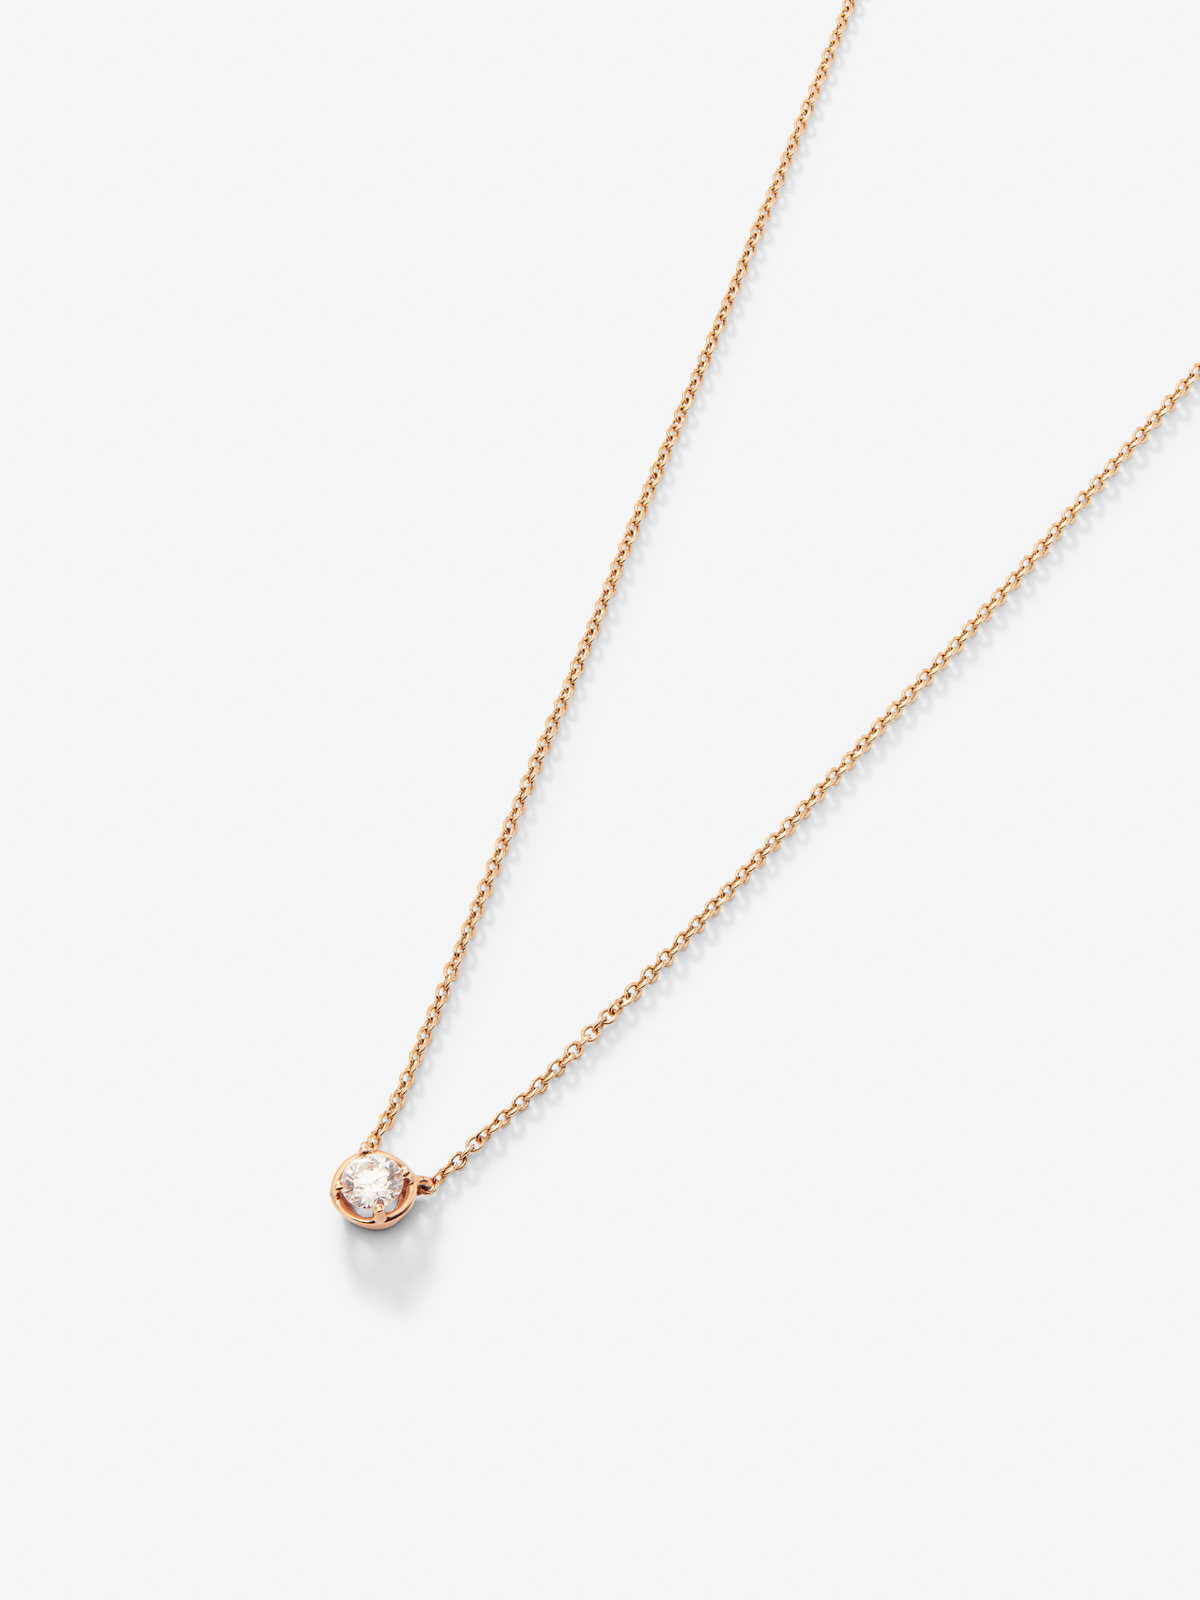 18K rose gold chain pendant with solitary diamond